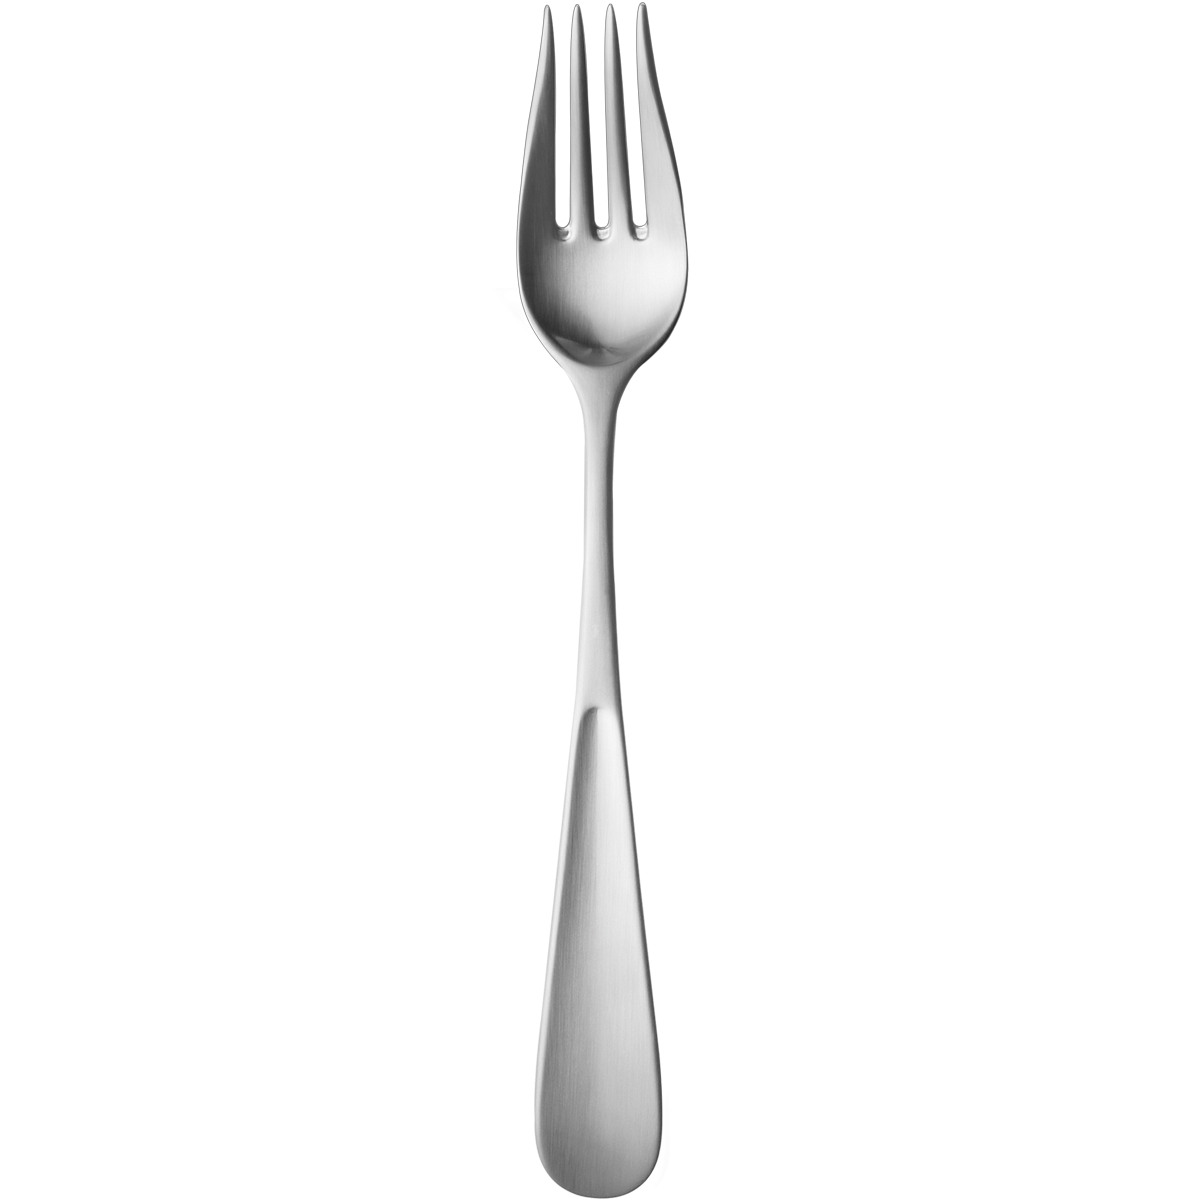 Single Spoon PNG HD Quality